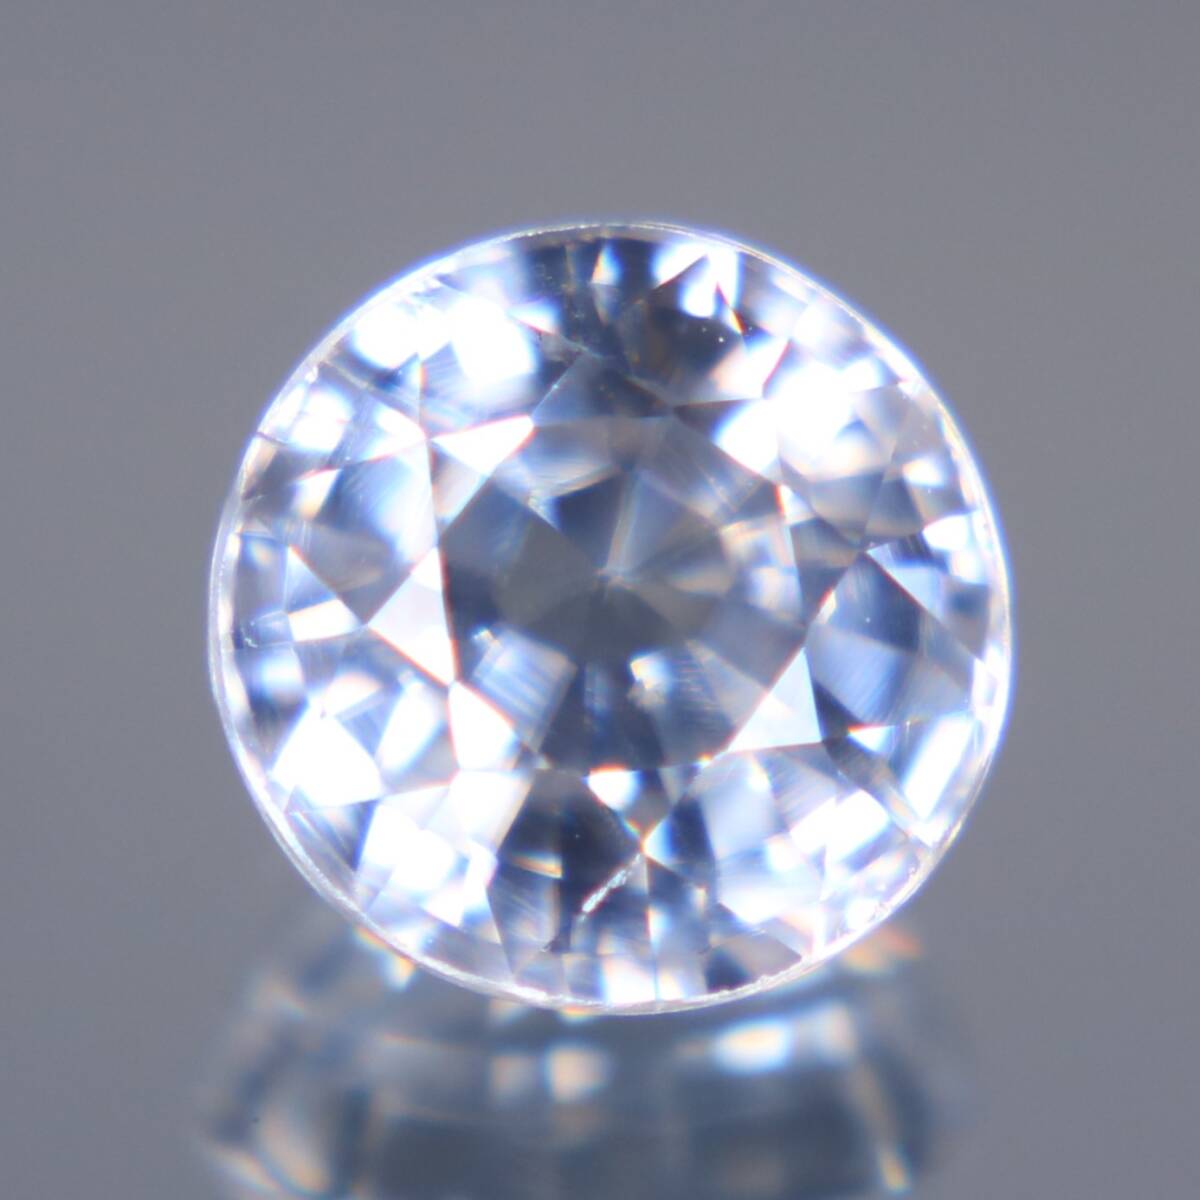  natural zircon 1.943ct[P115]so-ting attaching 